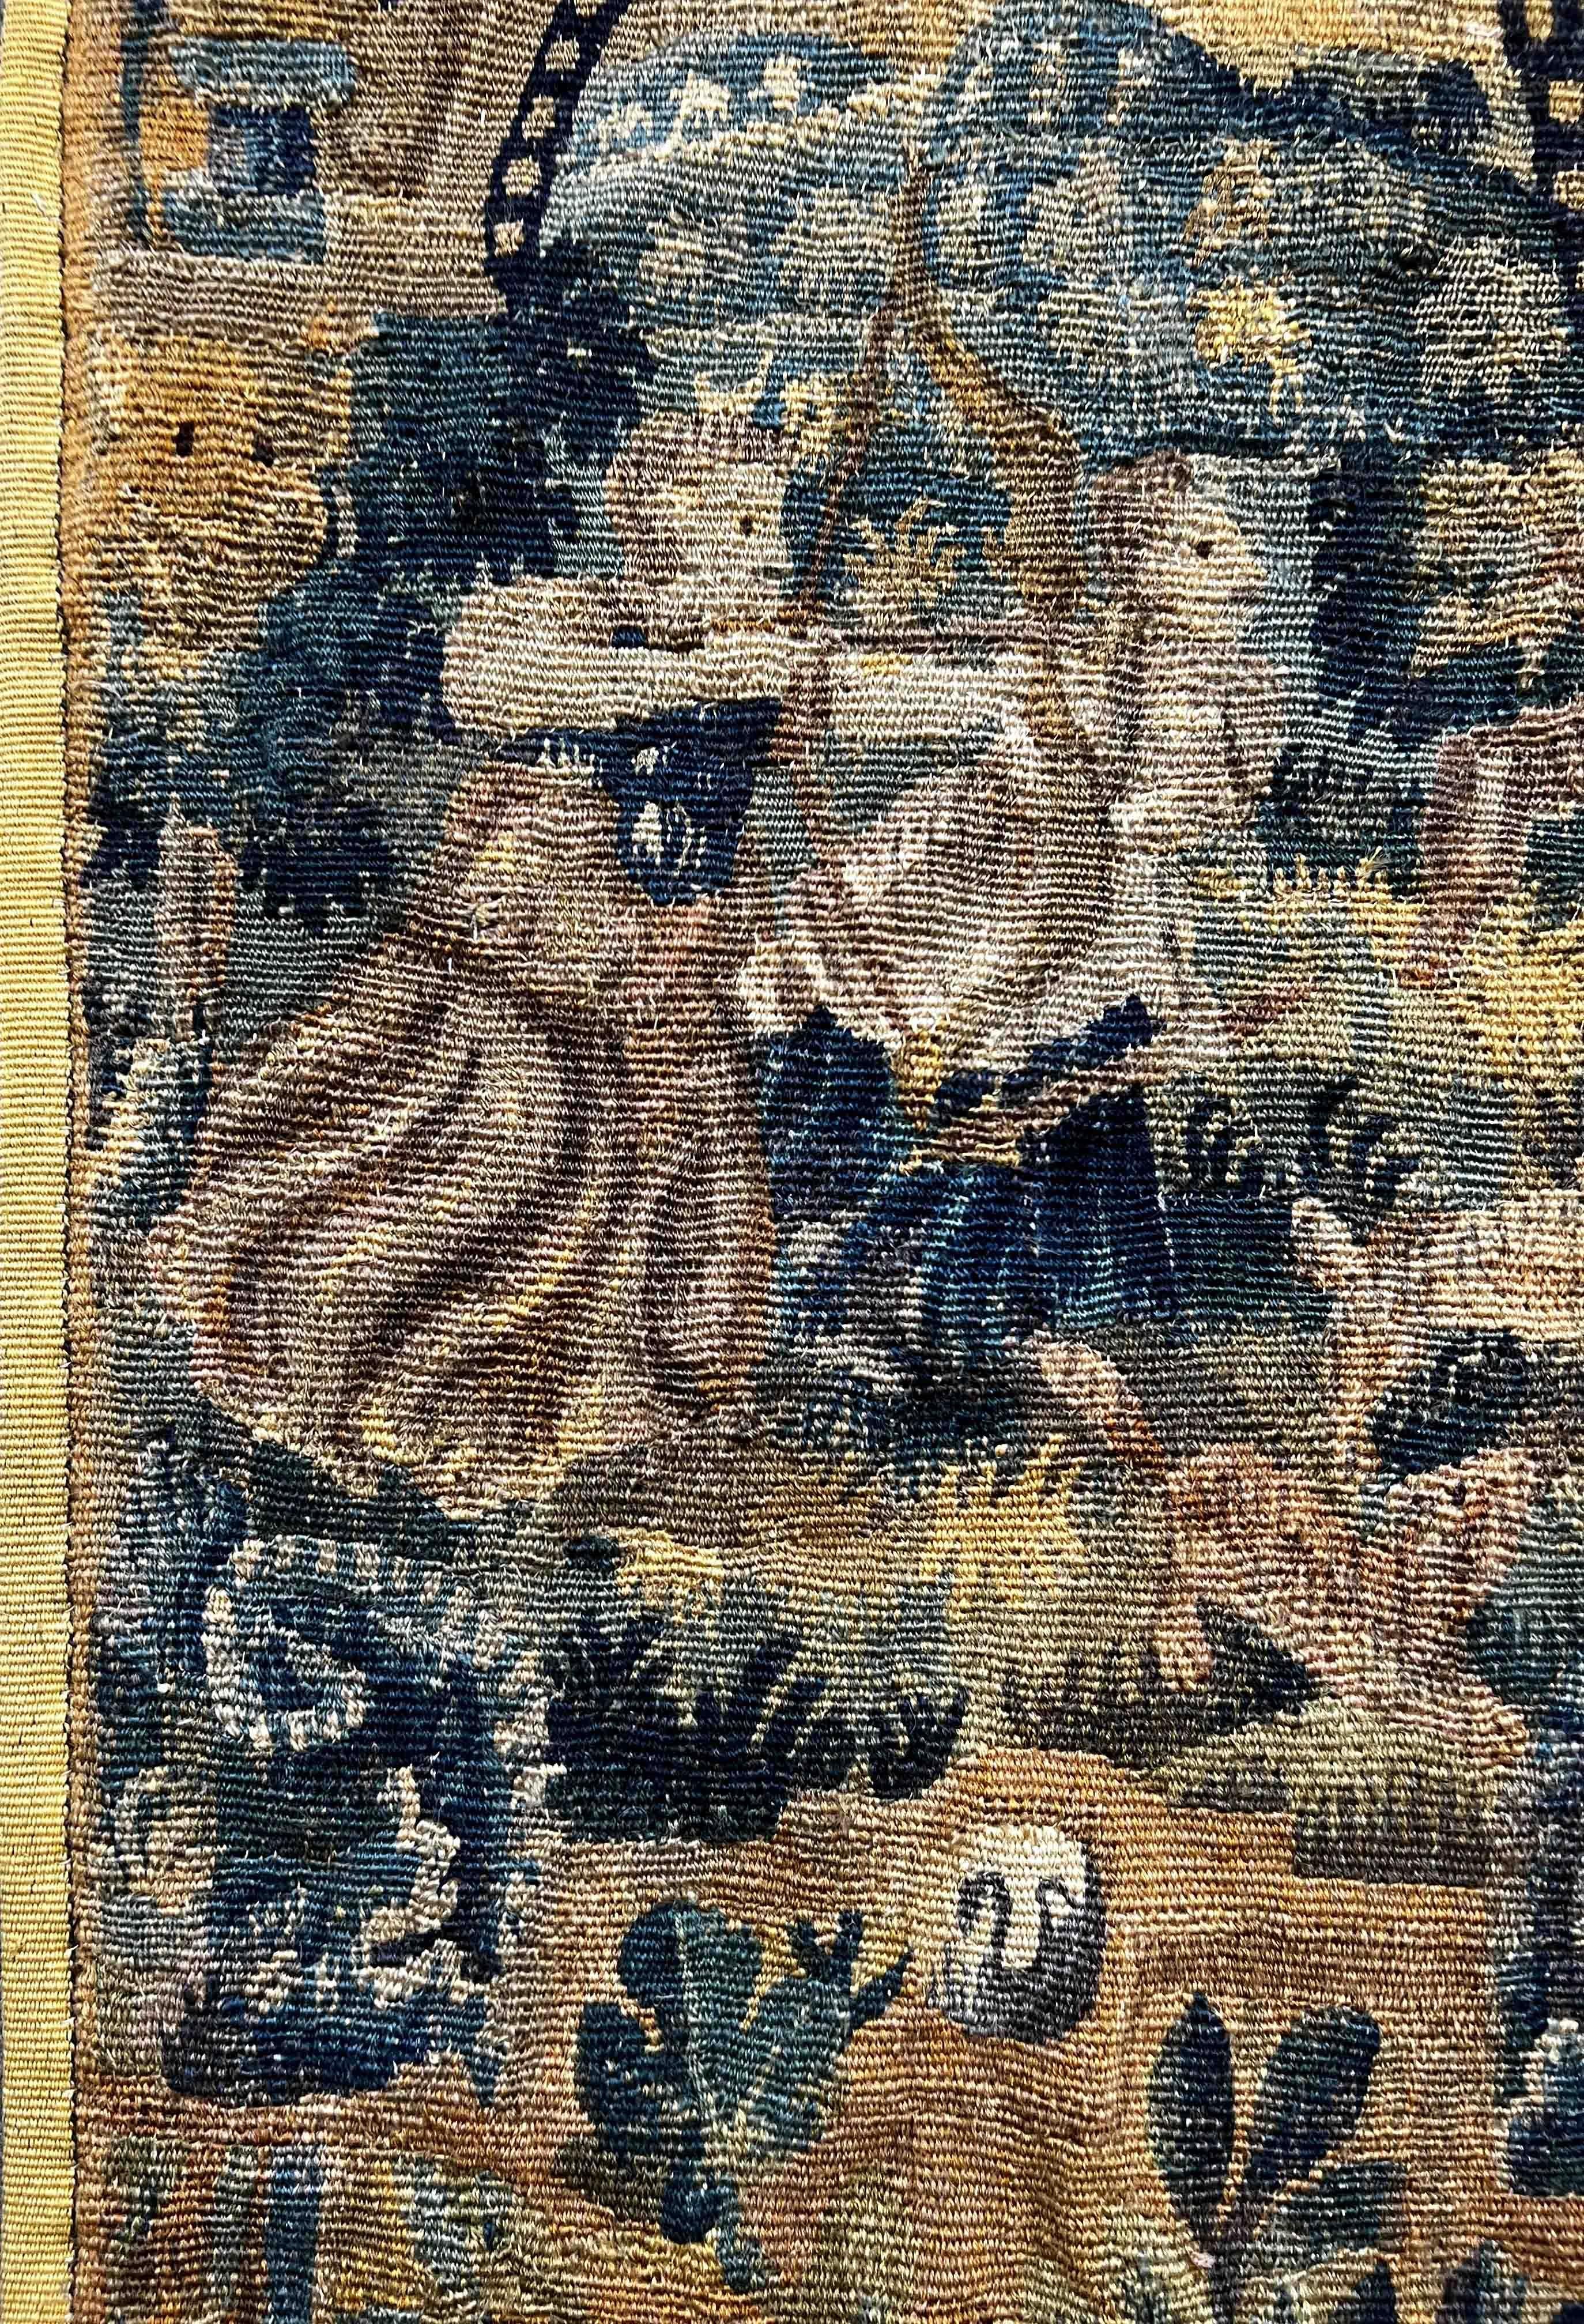 Hand-Woven 17th Century Tapestry from Flanders, N° 1184